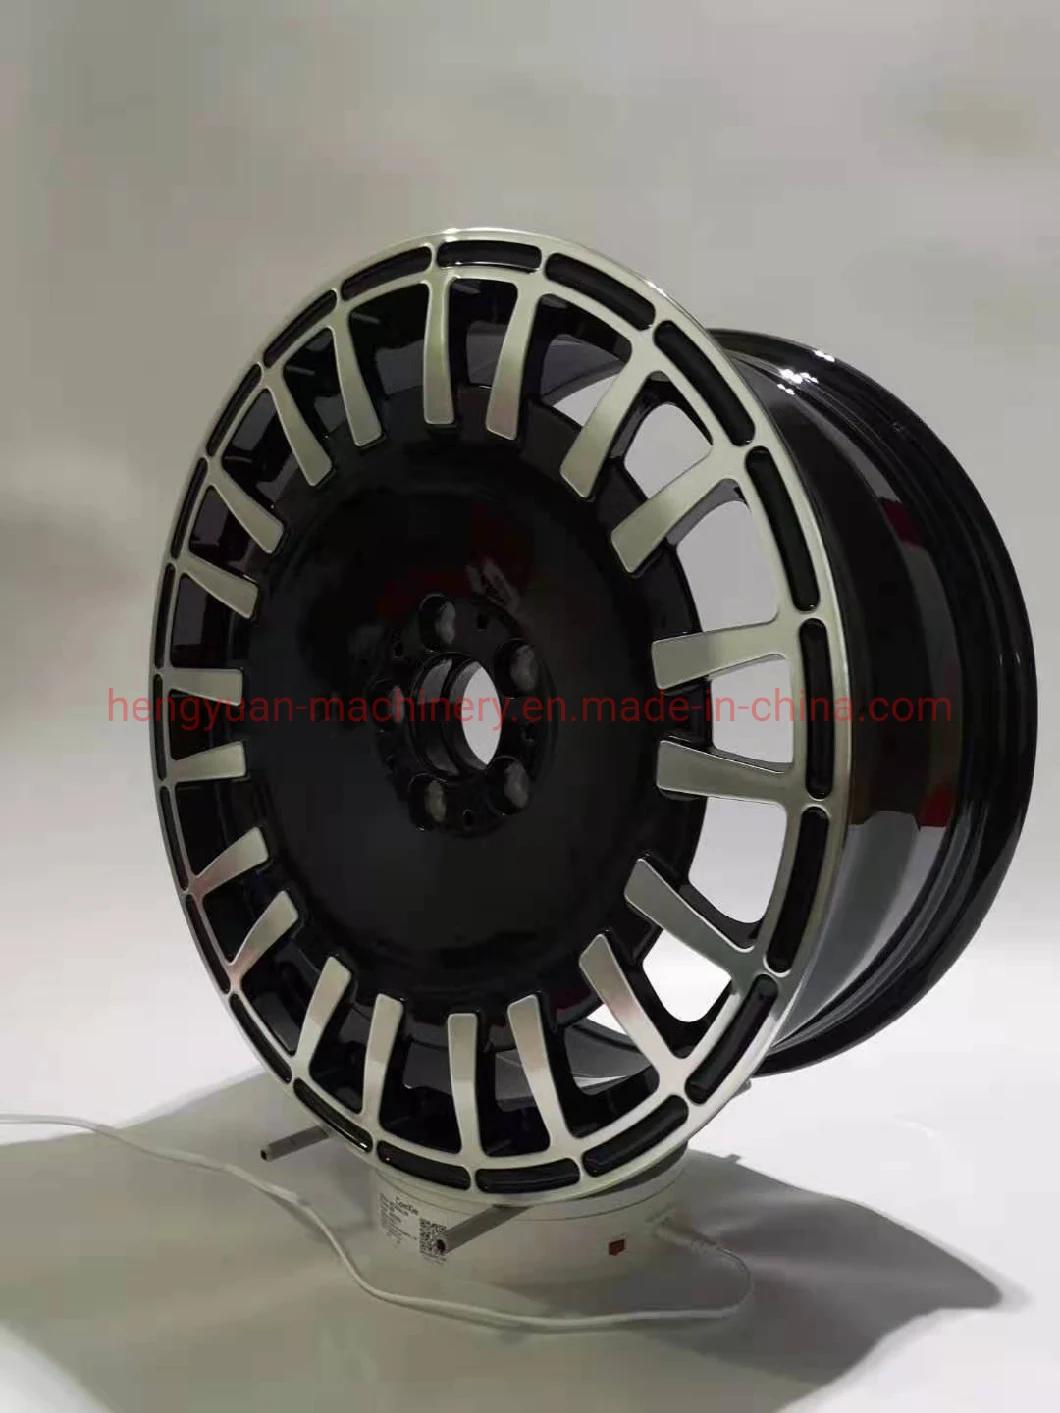 16-20-Super Quality of Forged Aluminum Wheels and Rims or Hubs